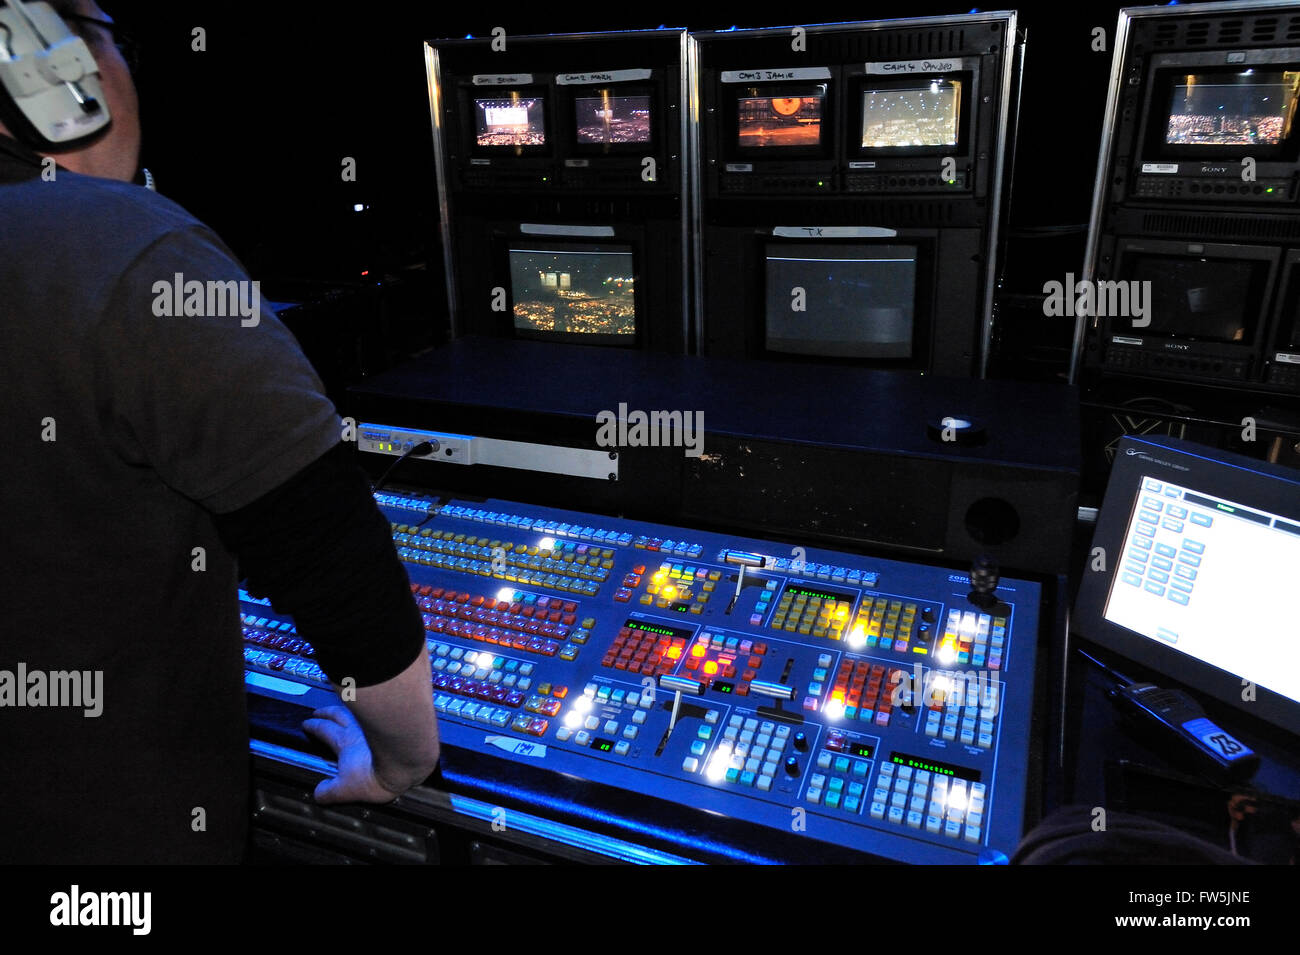 backstage mixing desk, control panel and production monitor screens, as used to balance sound and choose camera shots in a large stadium, such as here on a UK tour by Andrea Bocelli, tenor. Stock Photo